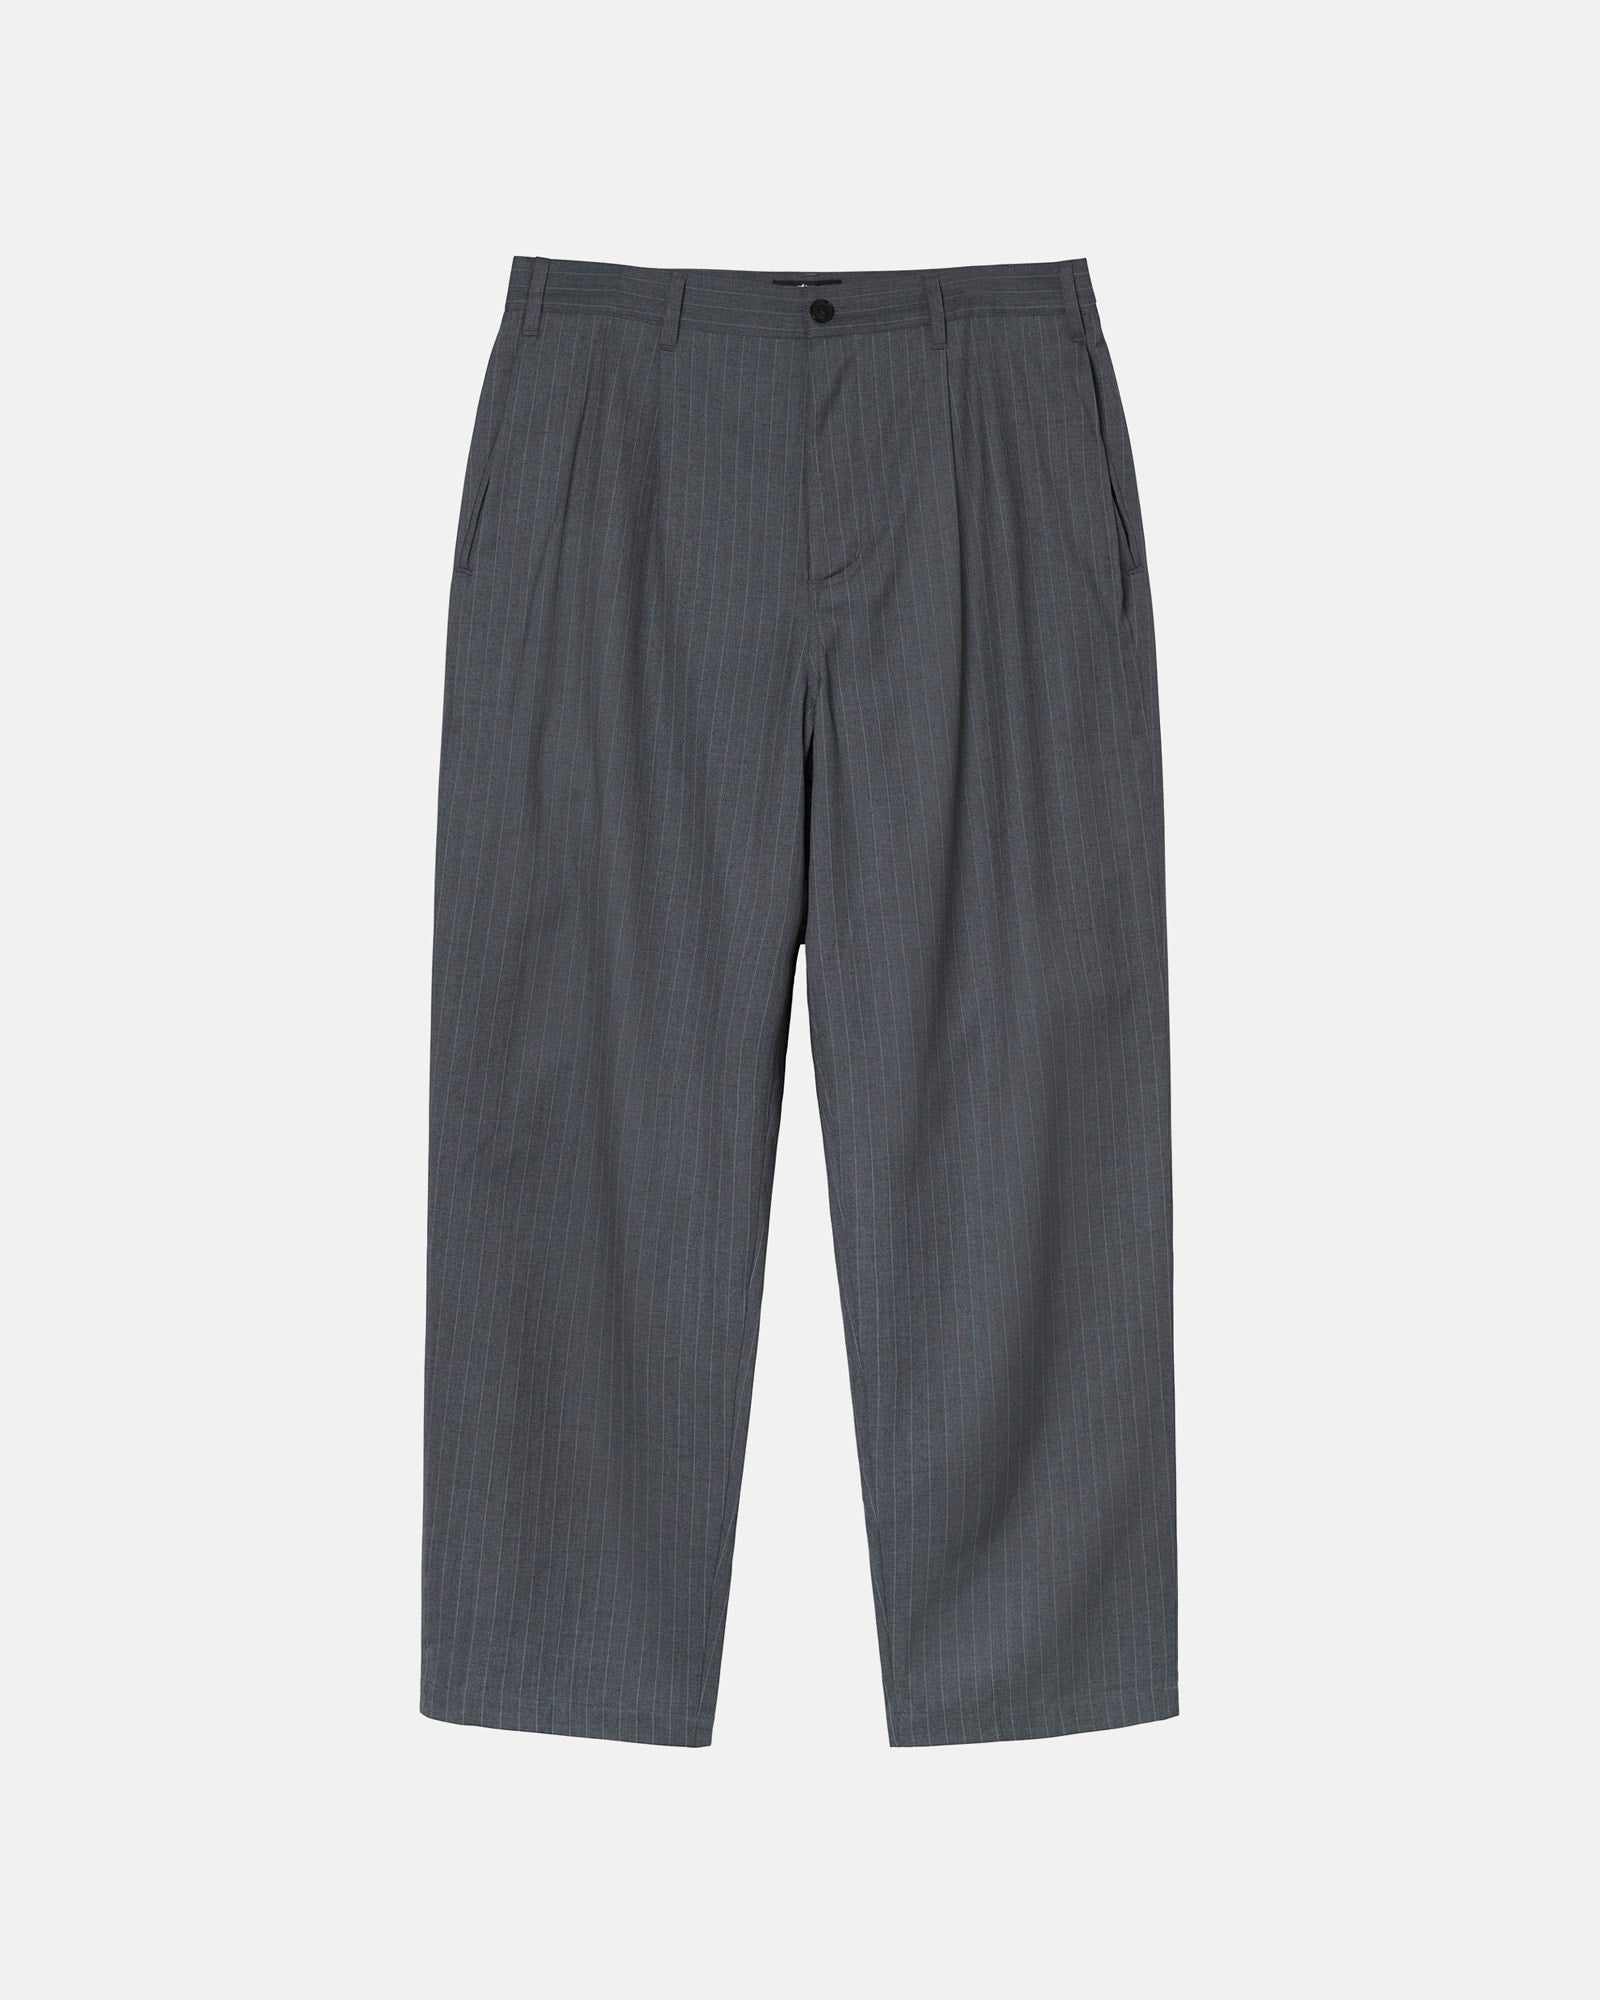 STUSSY STRIPED VOLUME PLEATED TROUSER 31パンツ